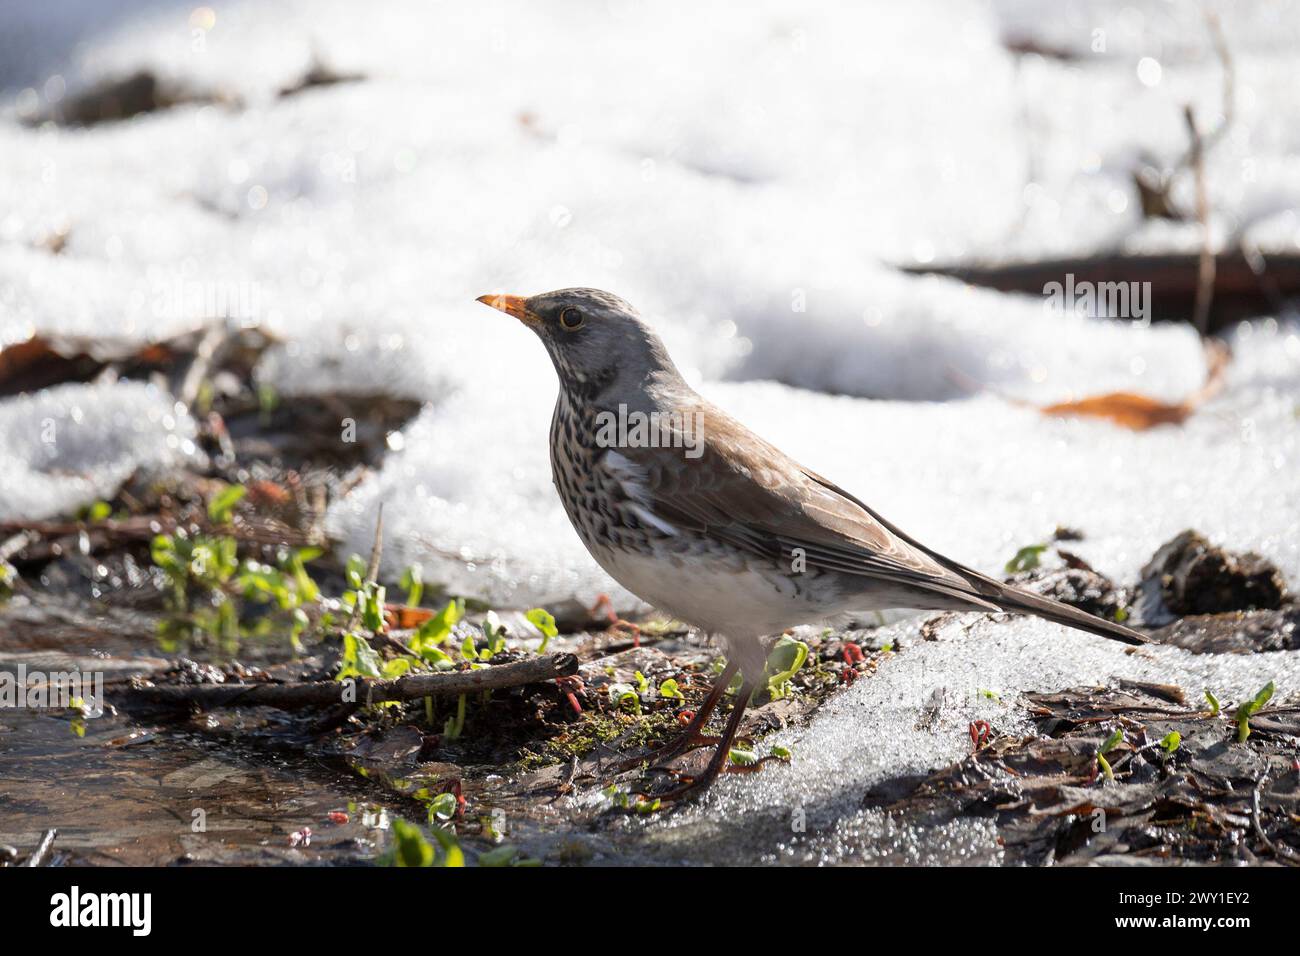 A field thrush bird stands on the snow near a thawed puddle in early spring Stock Photo